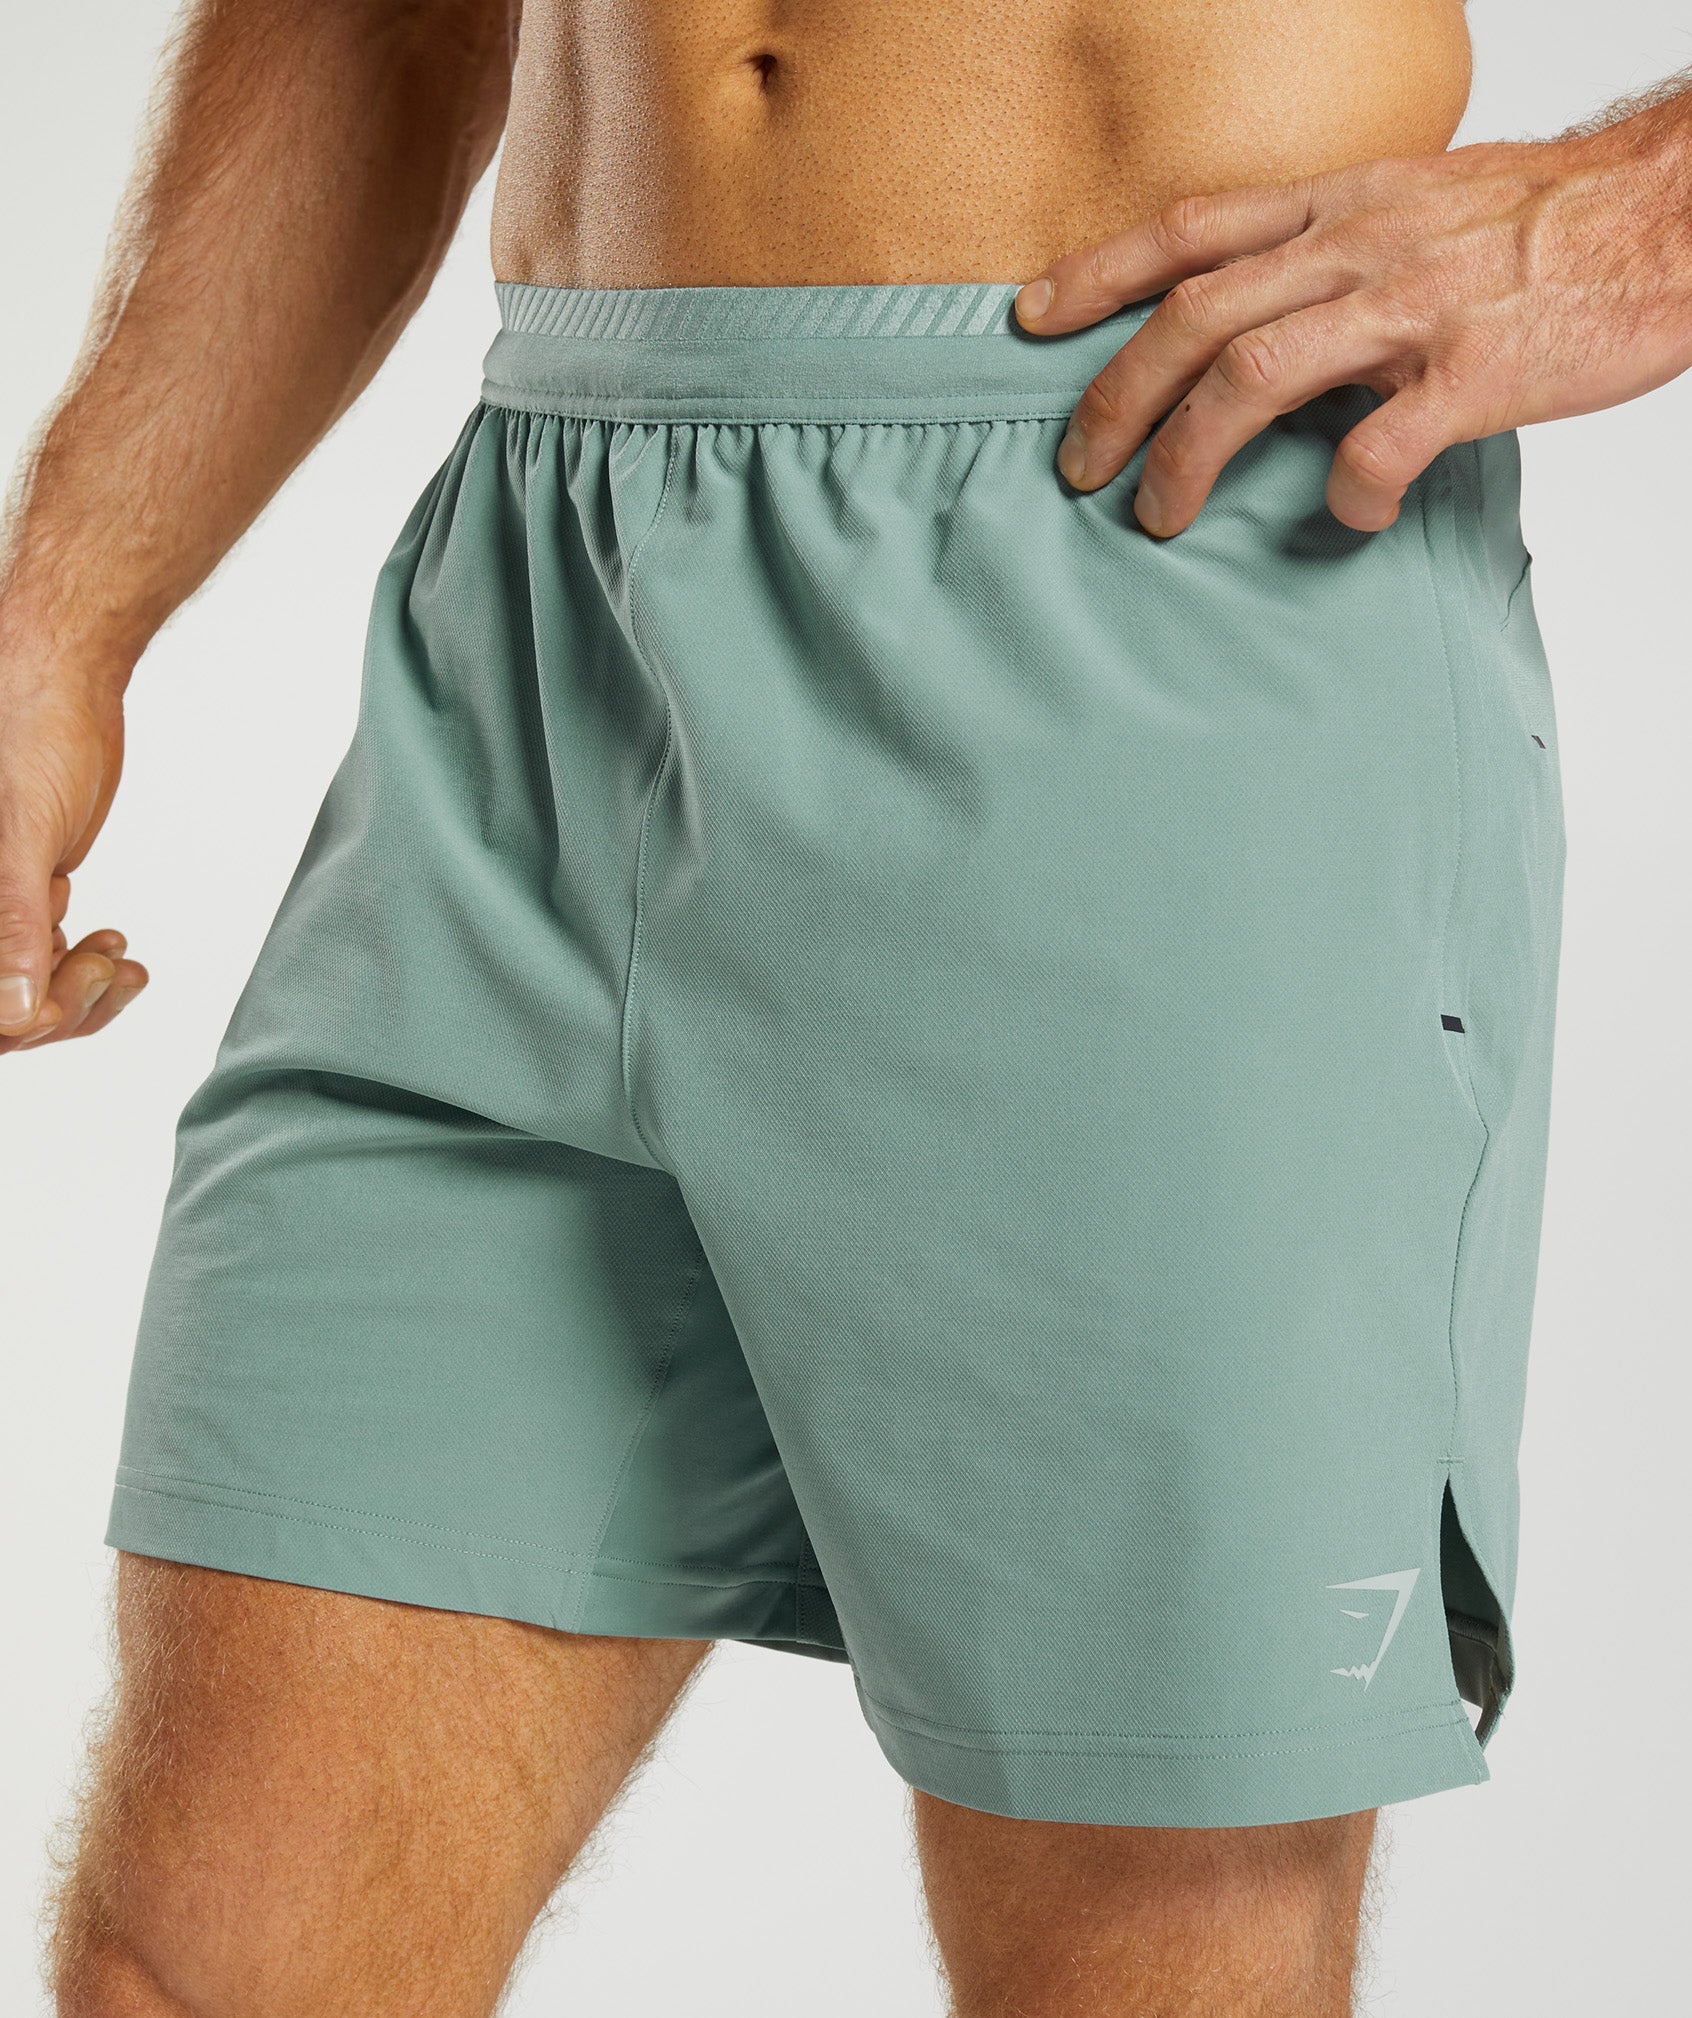 Apex 7" Hybrid Shorts in Ink Teal - view 6